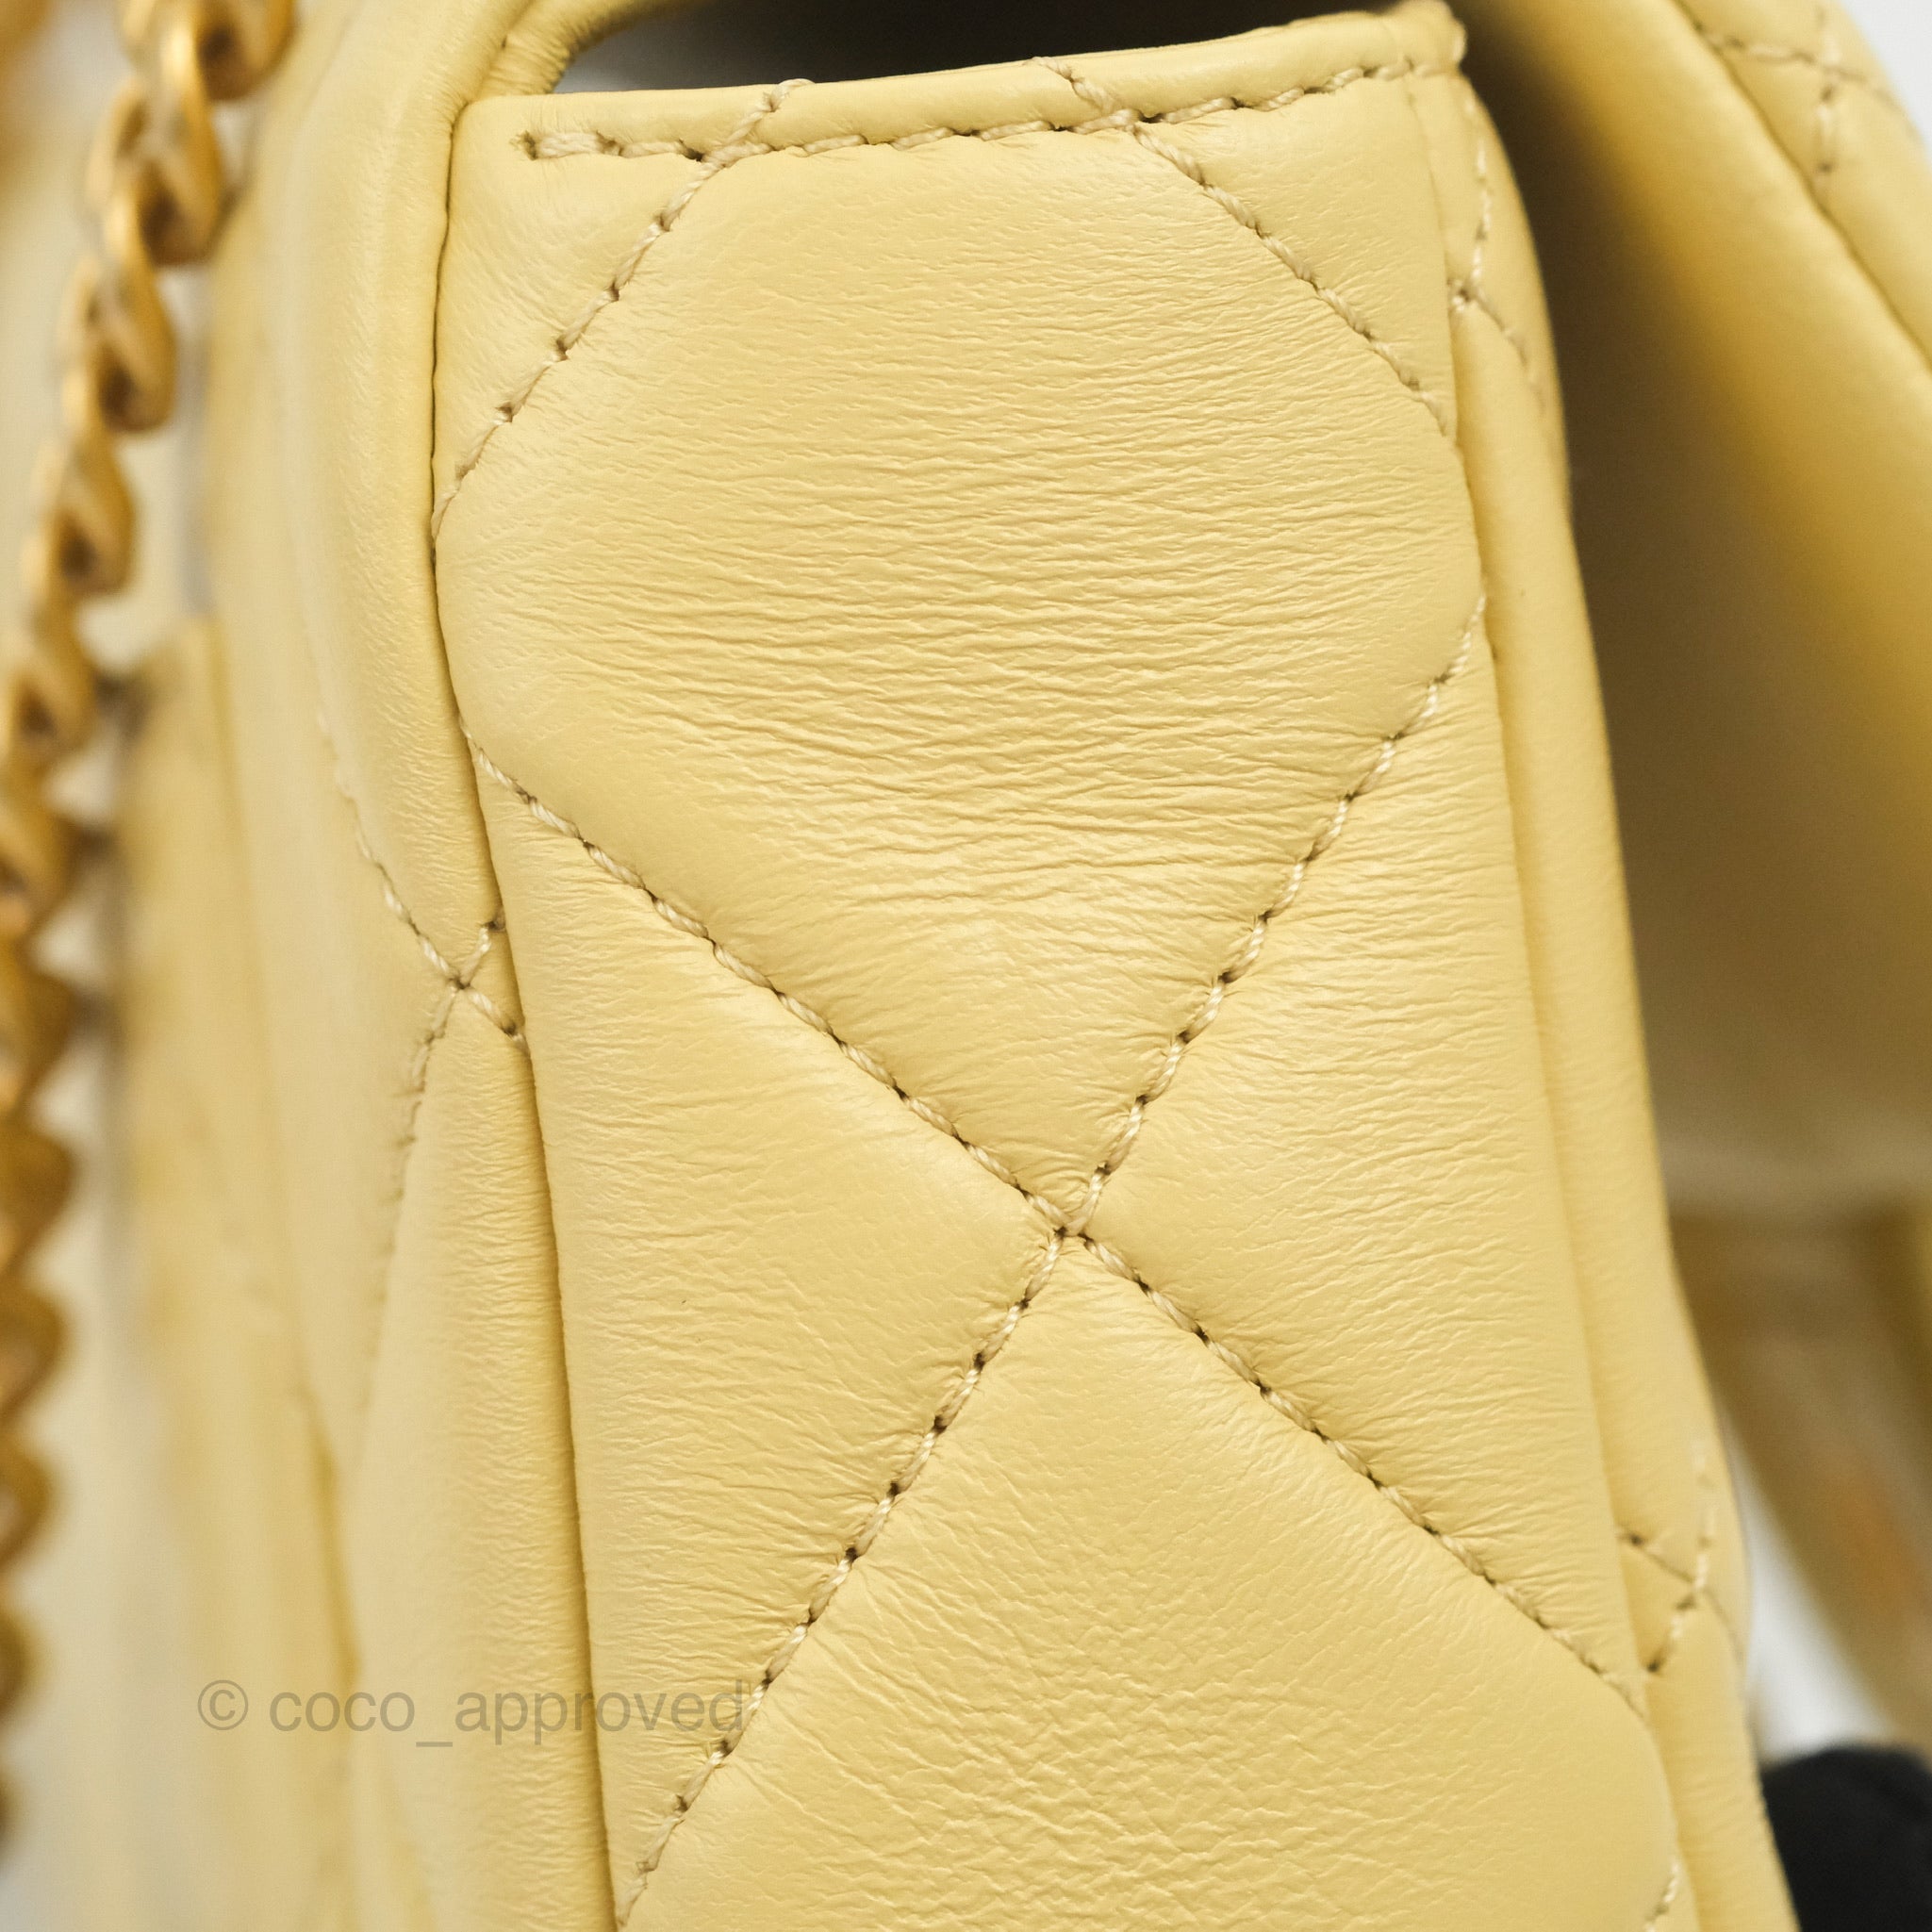 Chanel Enamel Quilted Pending CC Mini Square Flap Yellow Lambskin Aged –  Coco Approved Studio